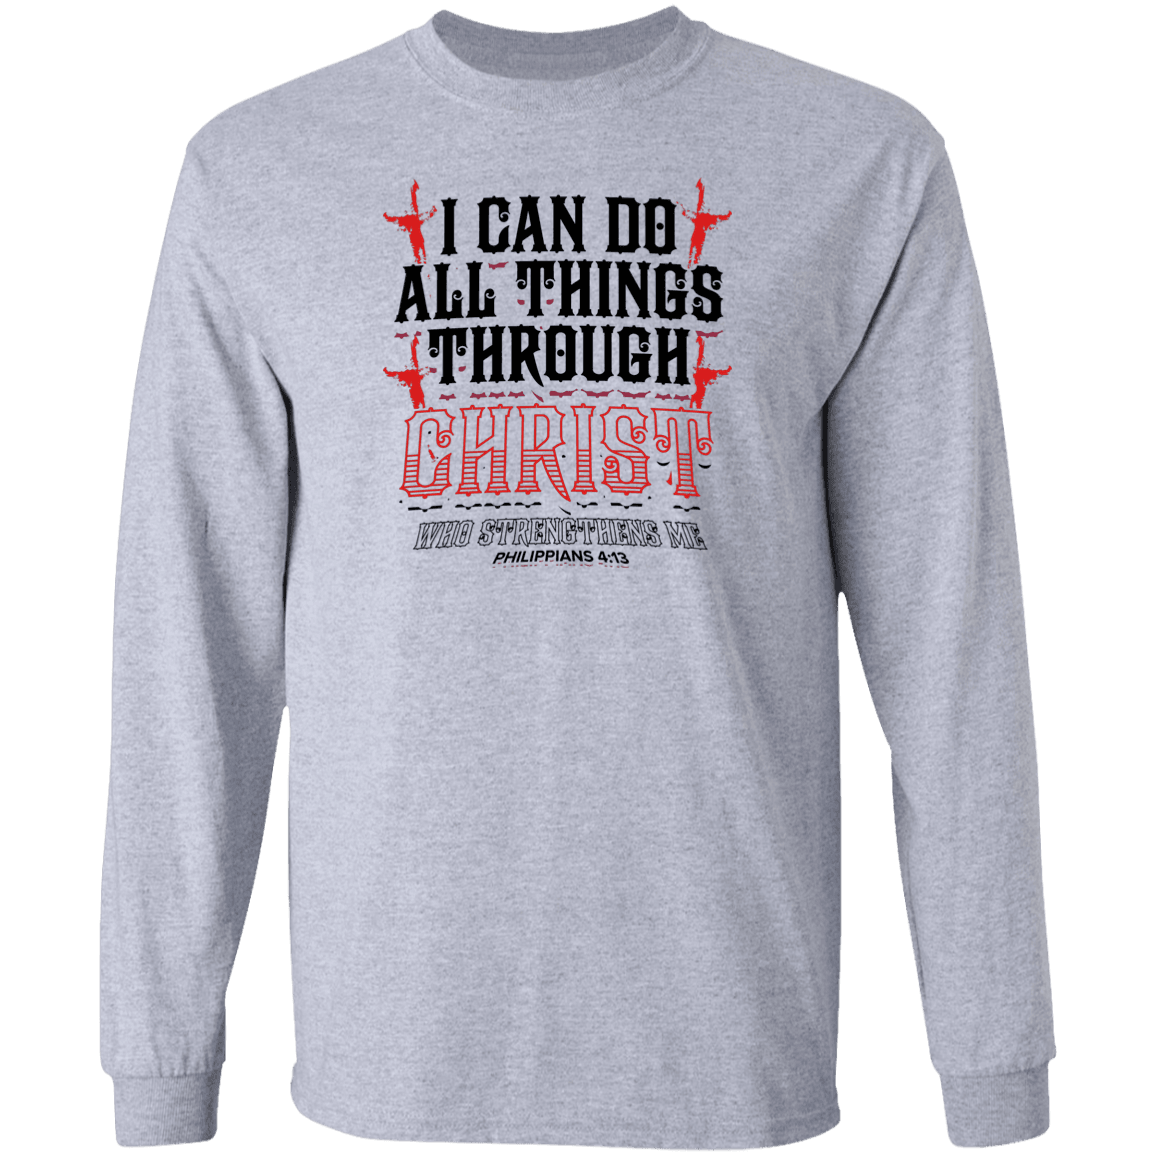 Designs by MyUtopia Shout Out:I Can Do All Things Through Christ Long Sleeve Ultra Cotton Unisex T-Shirt,S / Sport Grey,Long Sleeve T-Shirts